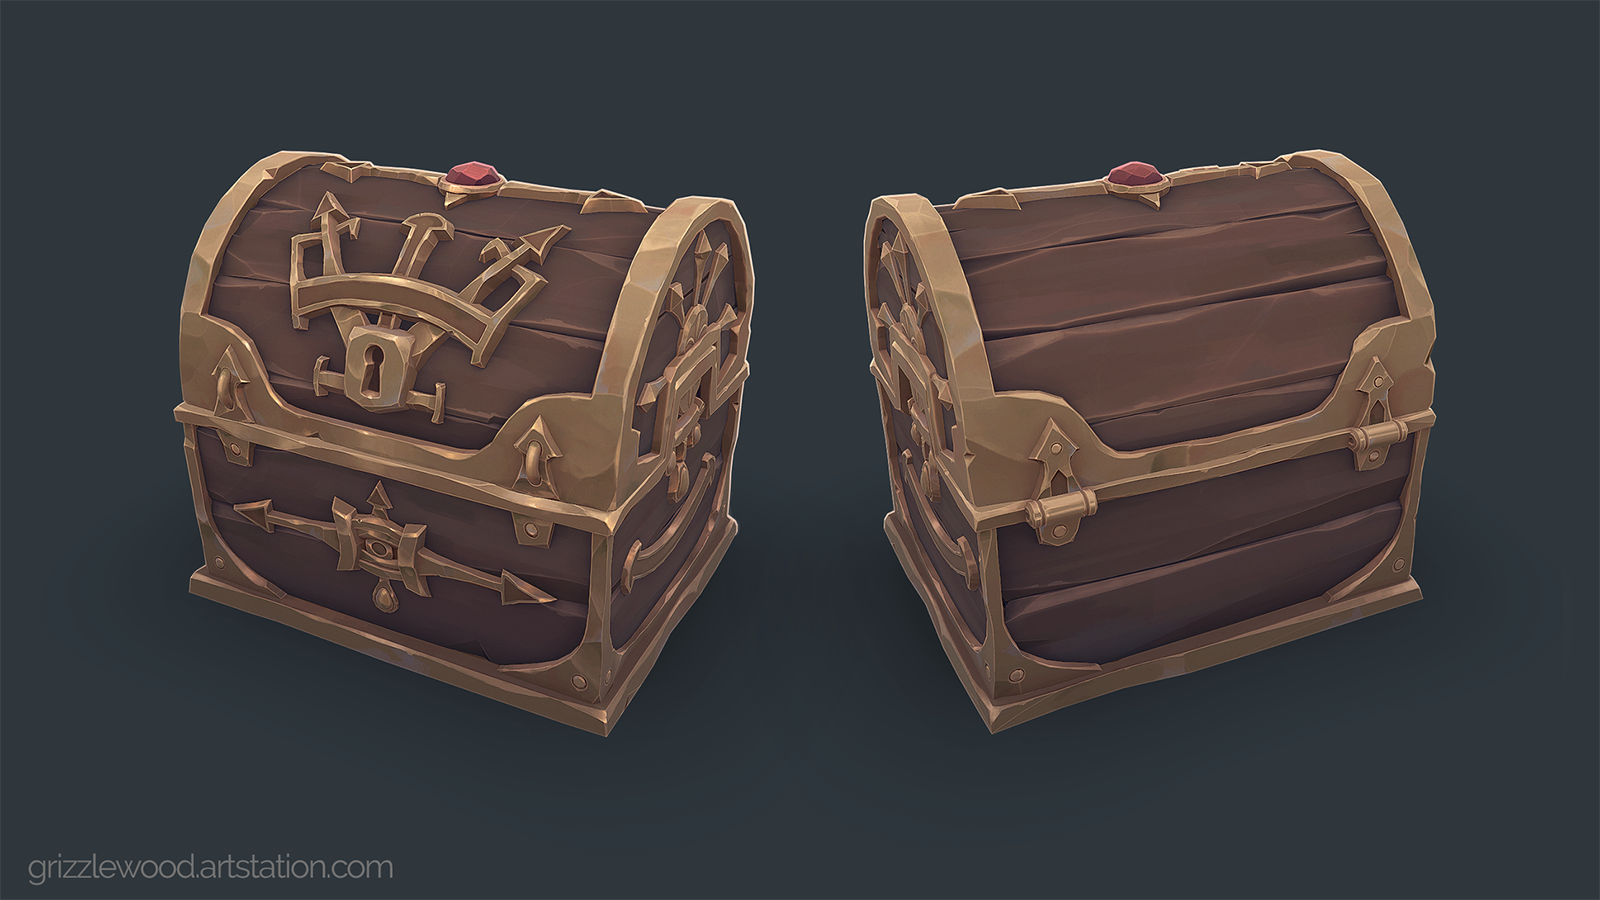 A stylised, hand-painted treasure chest based on the chest from Final Fantasy 9 by BA Games Art and Design student Adam Wood.